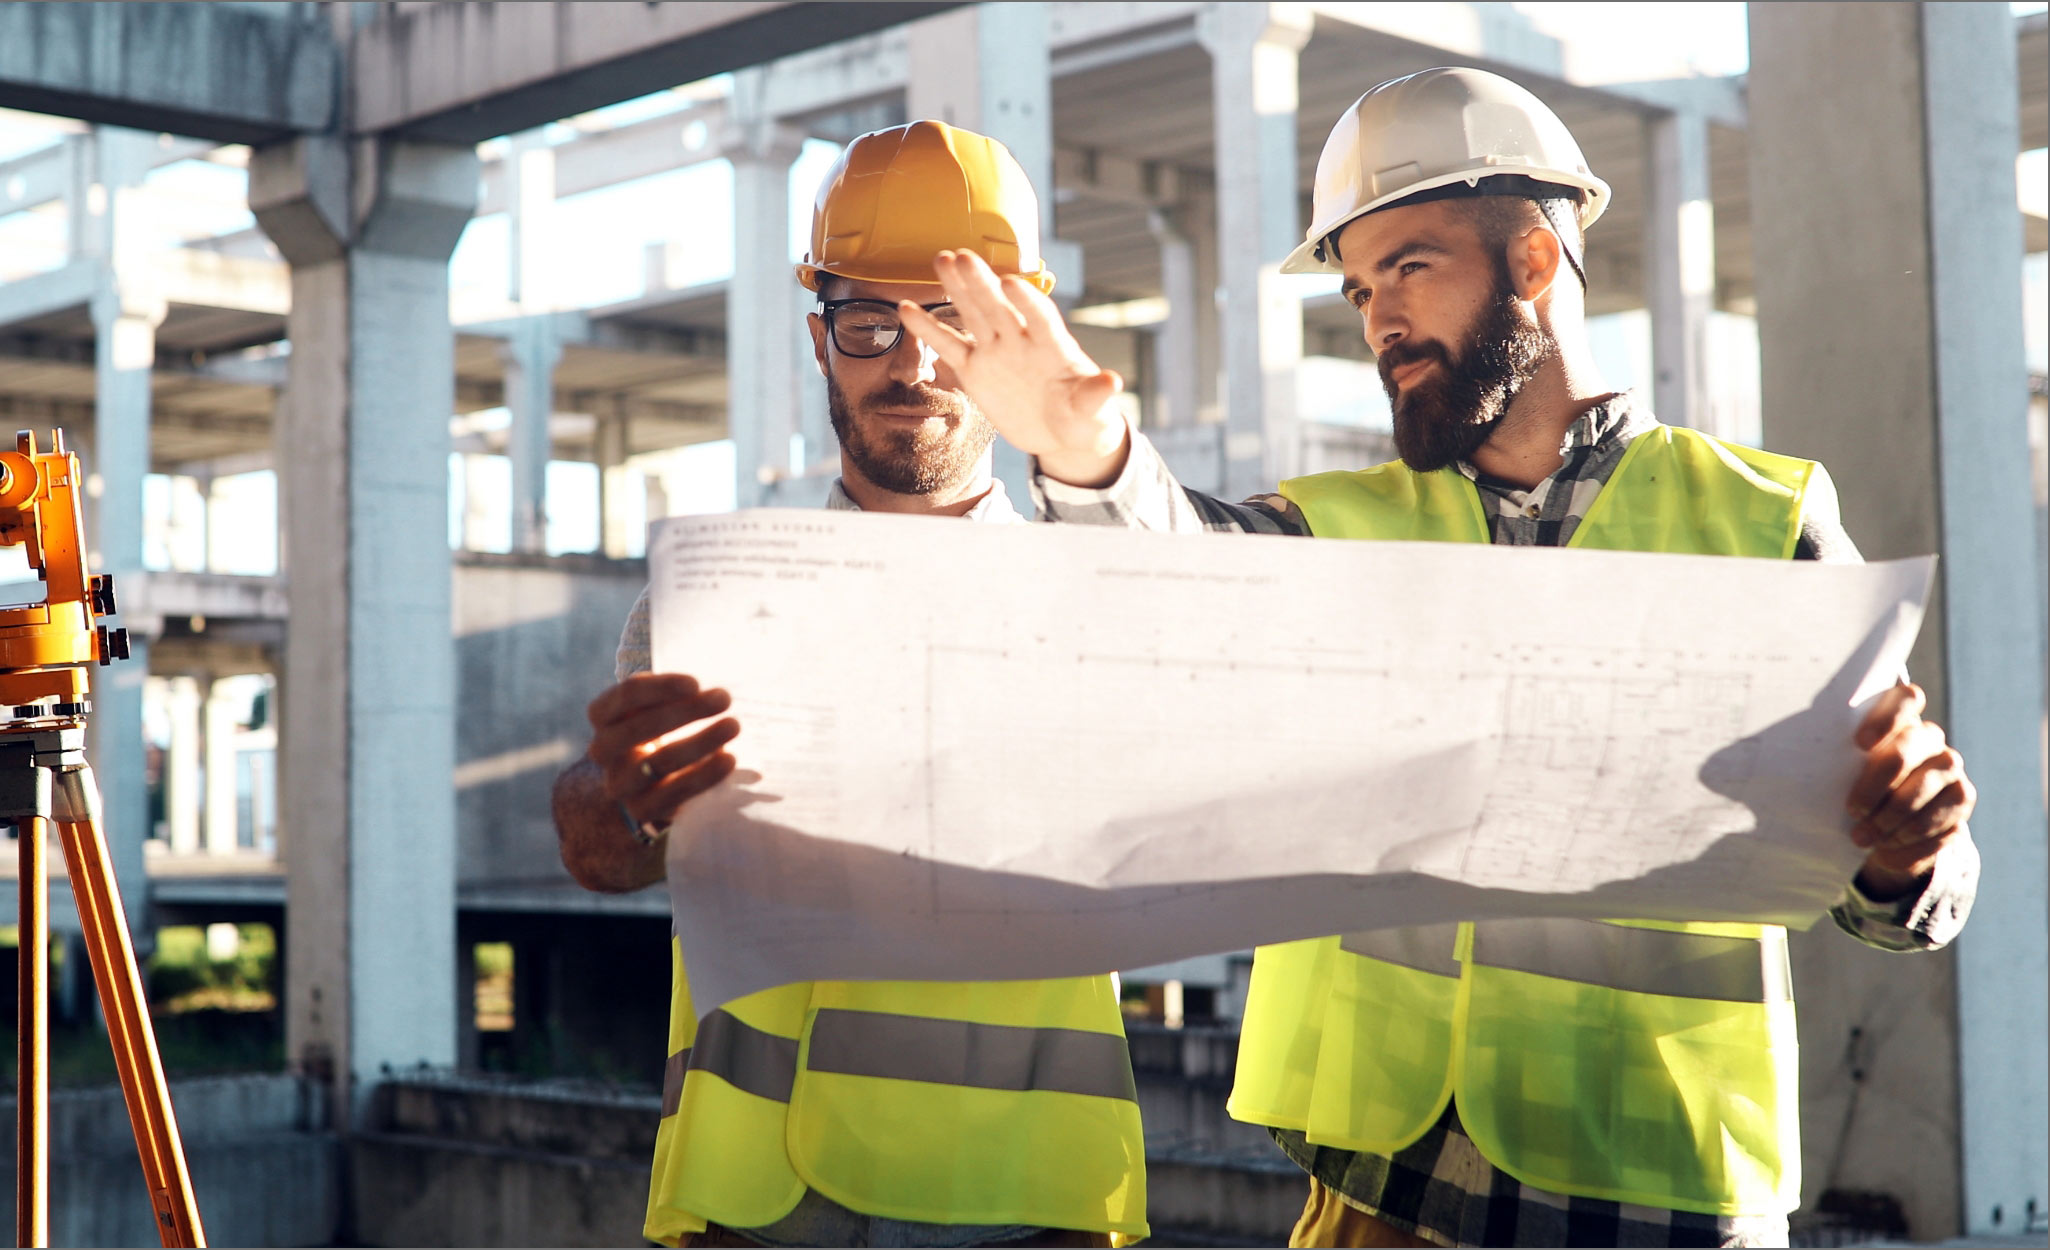 Workers review building plans on a construction site.